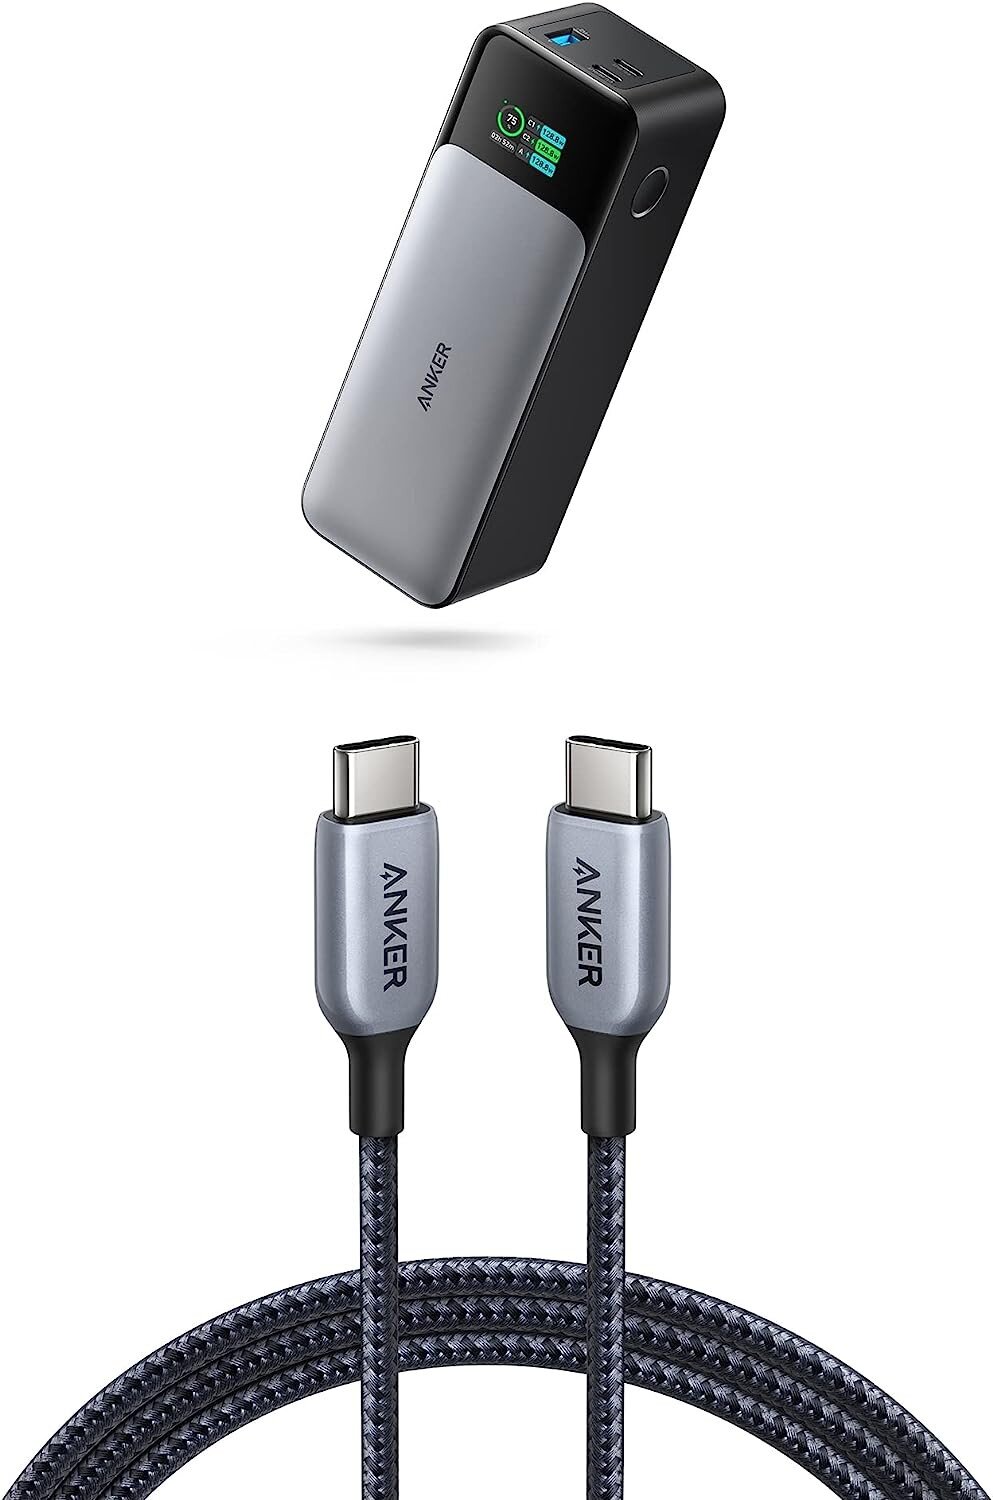 Anker's new PowerCore 24K can charge laptops at up to 140W over